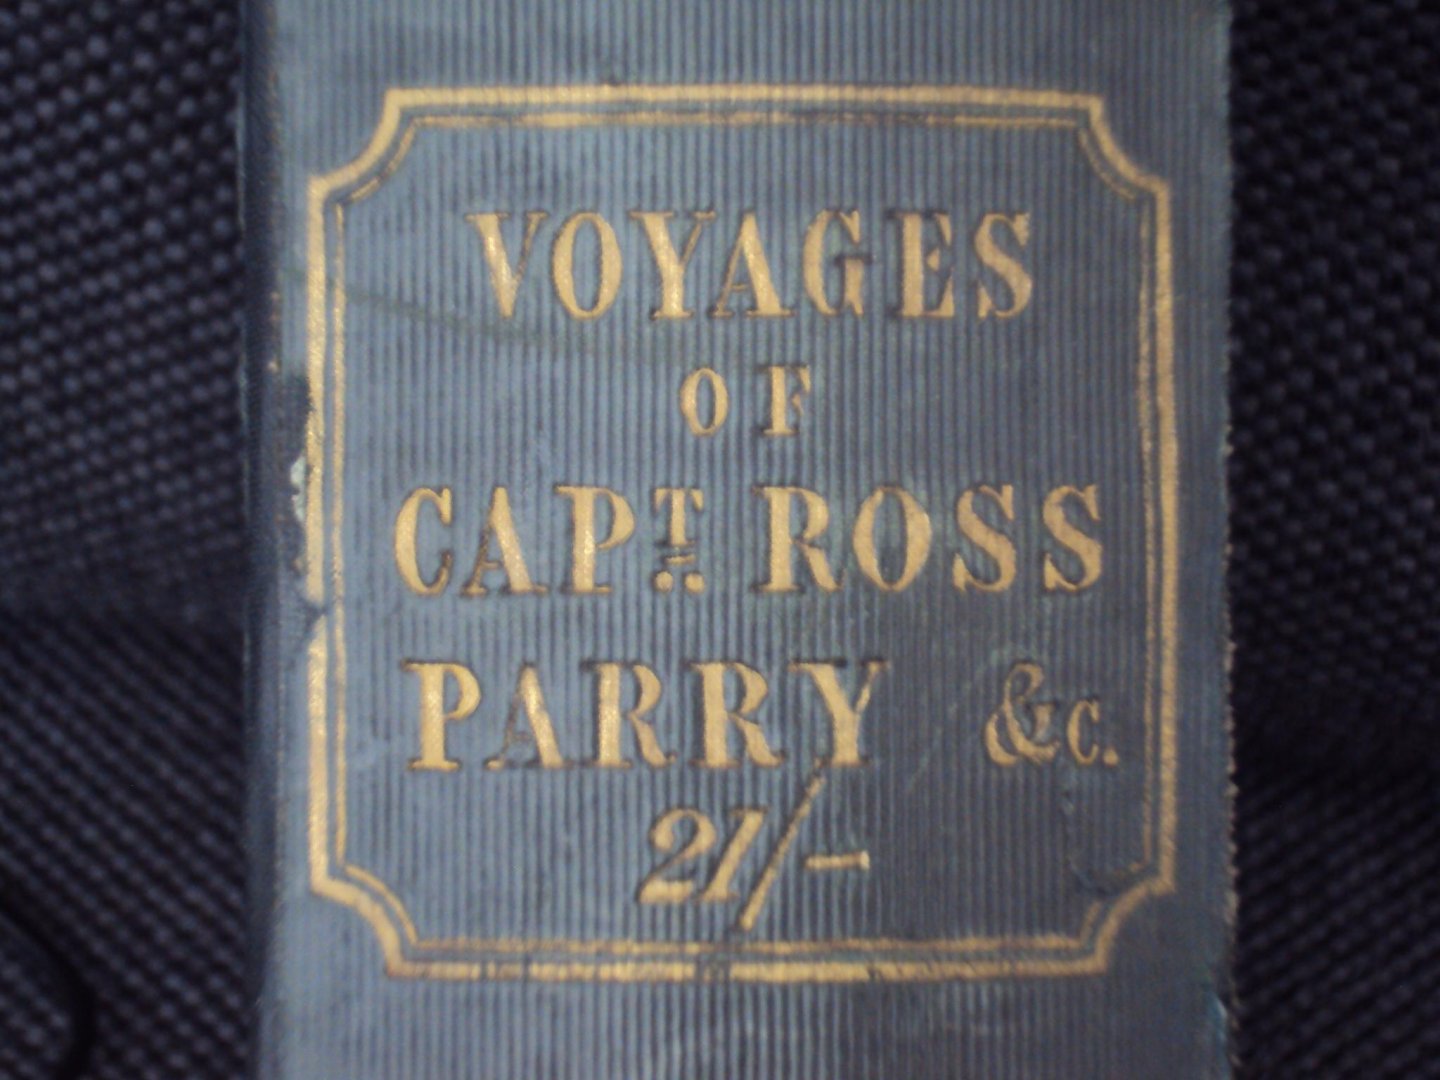 J.F. Dennett - Voyages and travels of captains Ross, Parry, Franklin, and mr. Belzoni